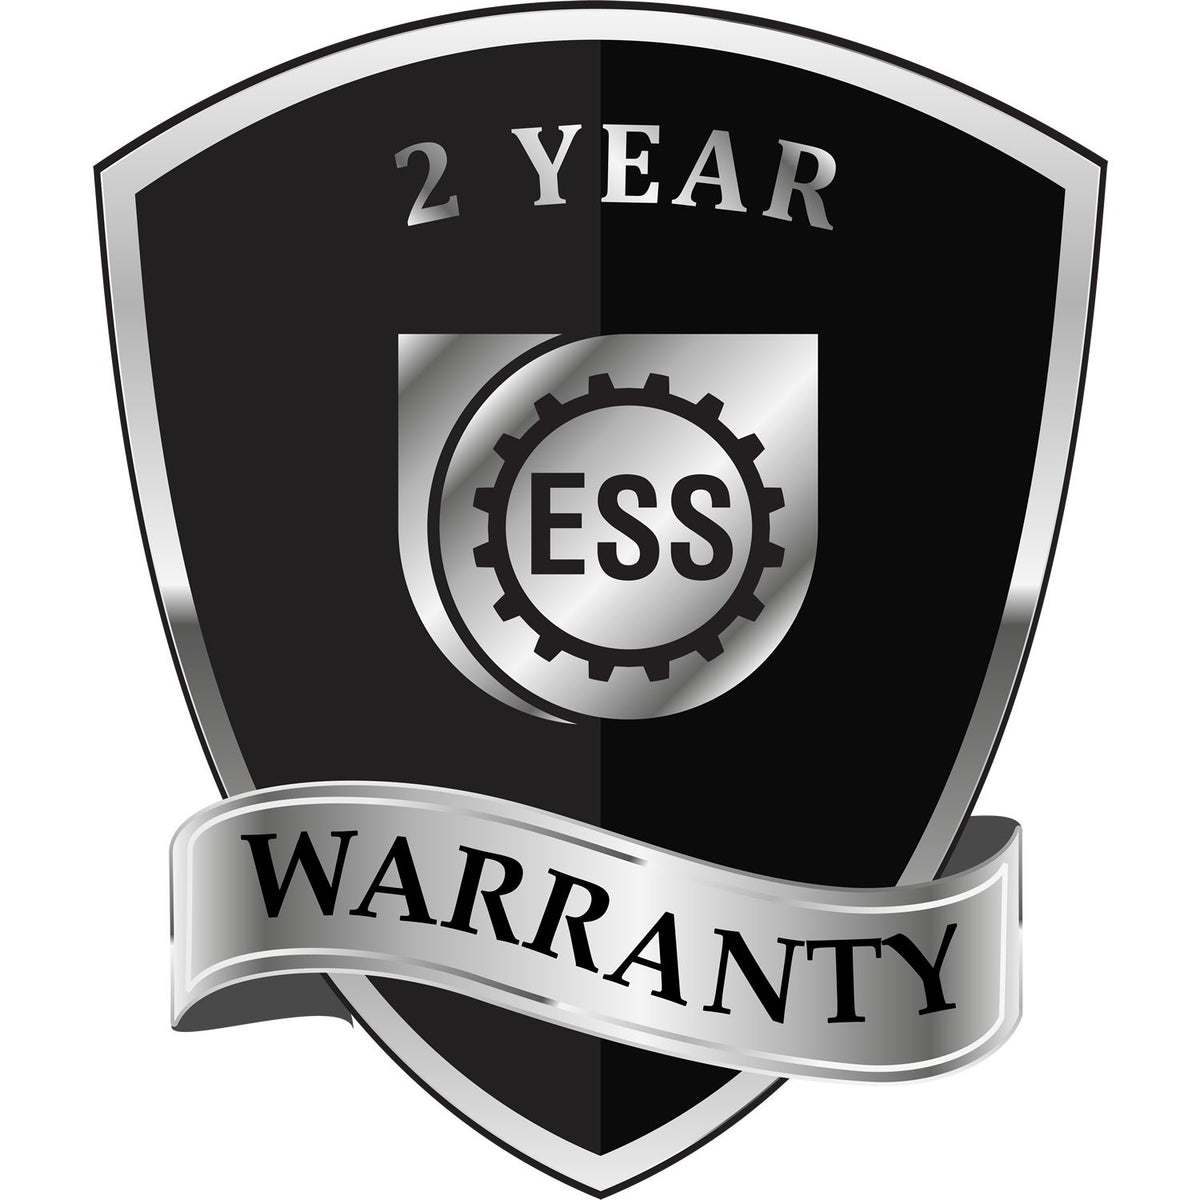 A black and silver badge or emblem showing warranty information for the Hybrid Louisiana Geologist Seal